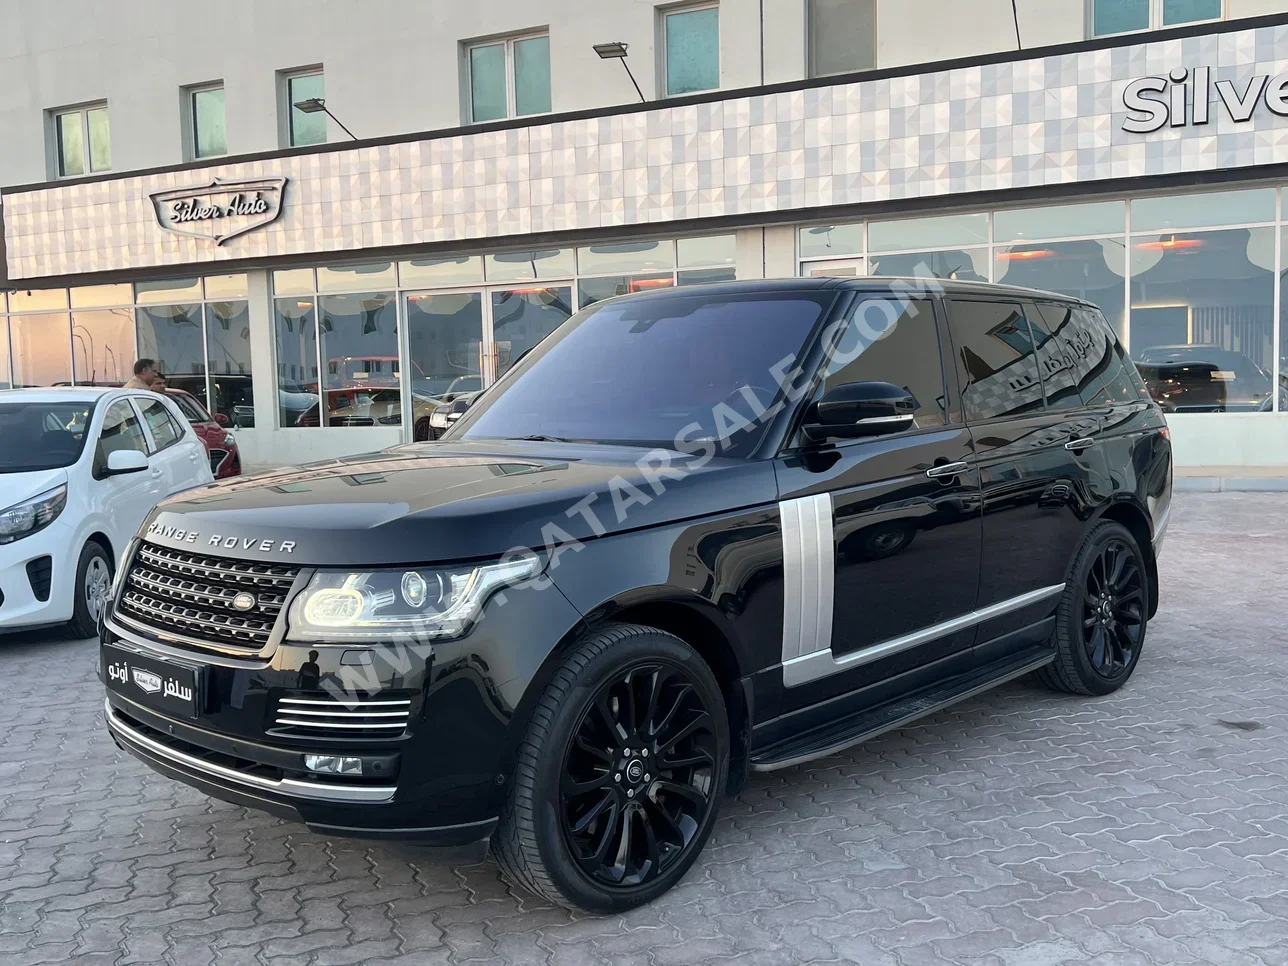 Land Rover  Range Rover  Vogue SE Super charged  2016  Automatic  116,000 Km  8 Cylinder  Four Wheel Drive (4WD)  SUV  Black